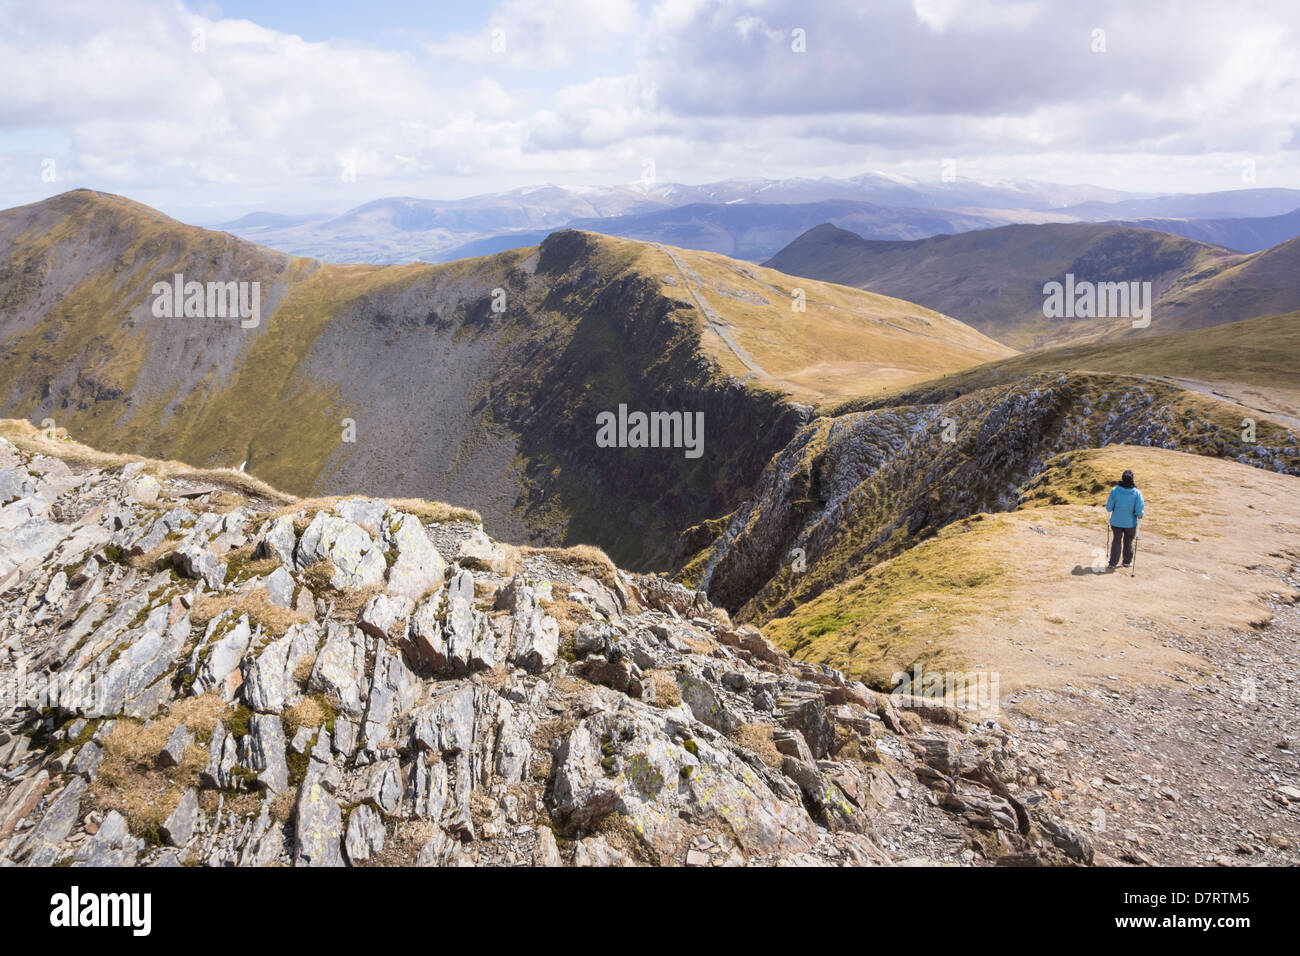 A hiker walking from the Summit of Hopegill Head towards Hobcarton and Grisedale Pike in the Lake District Stock Photo